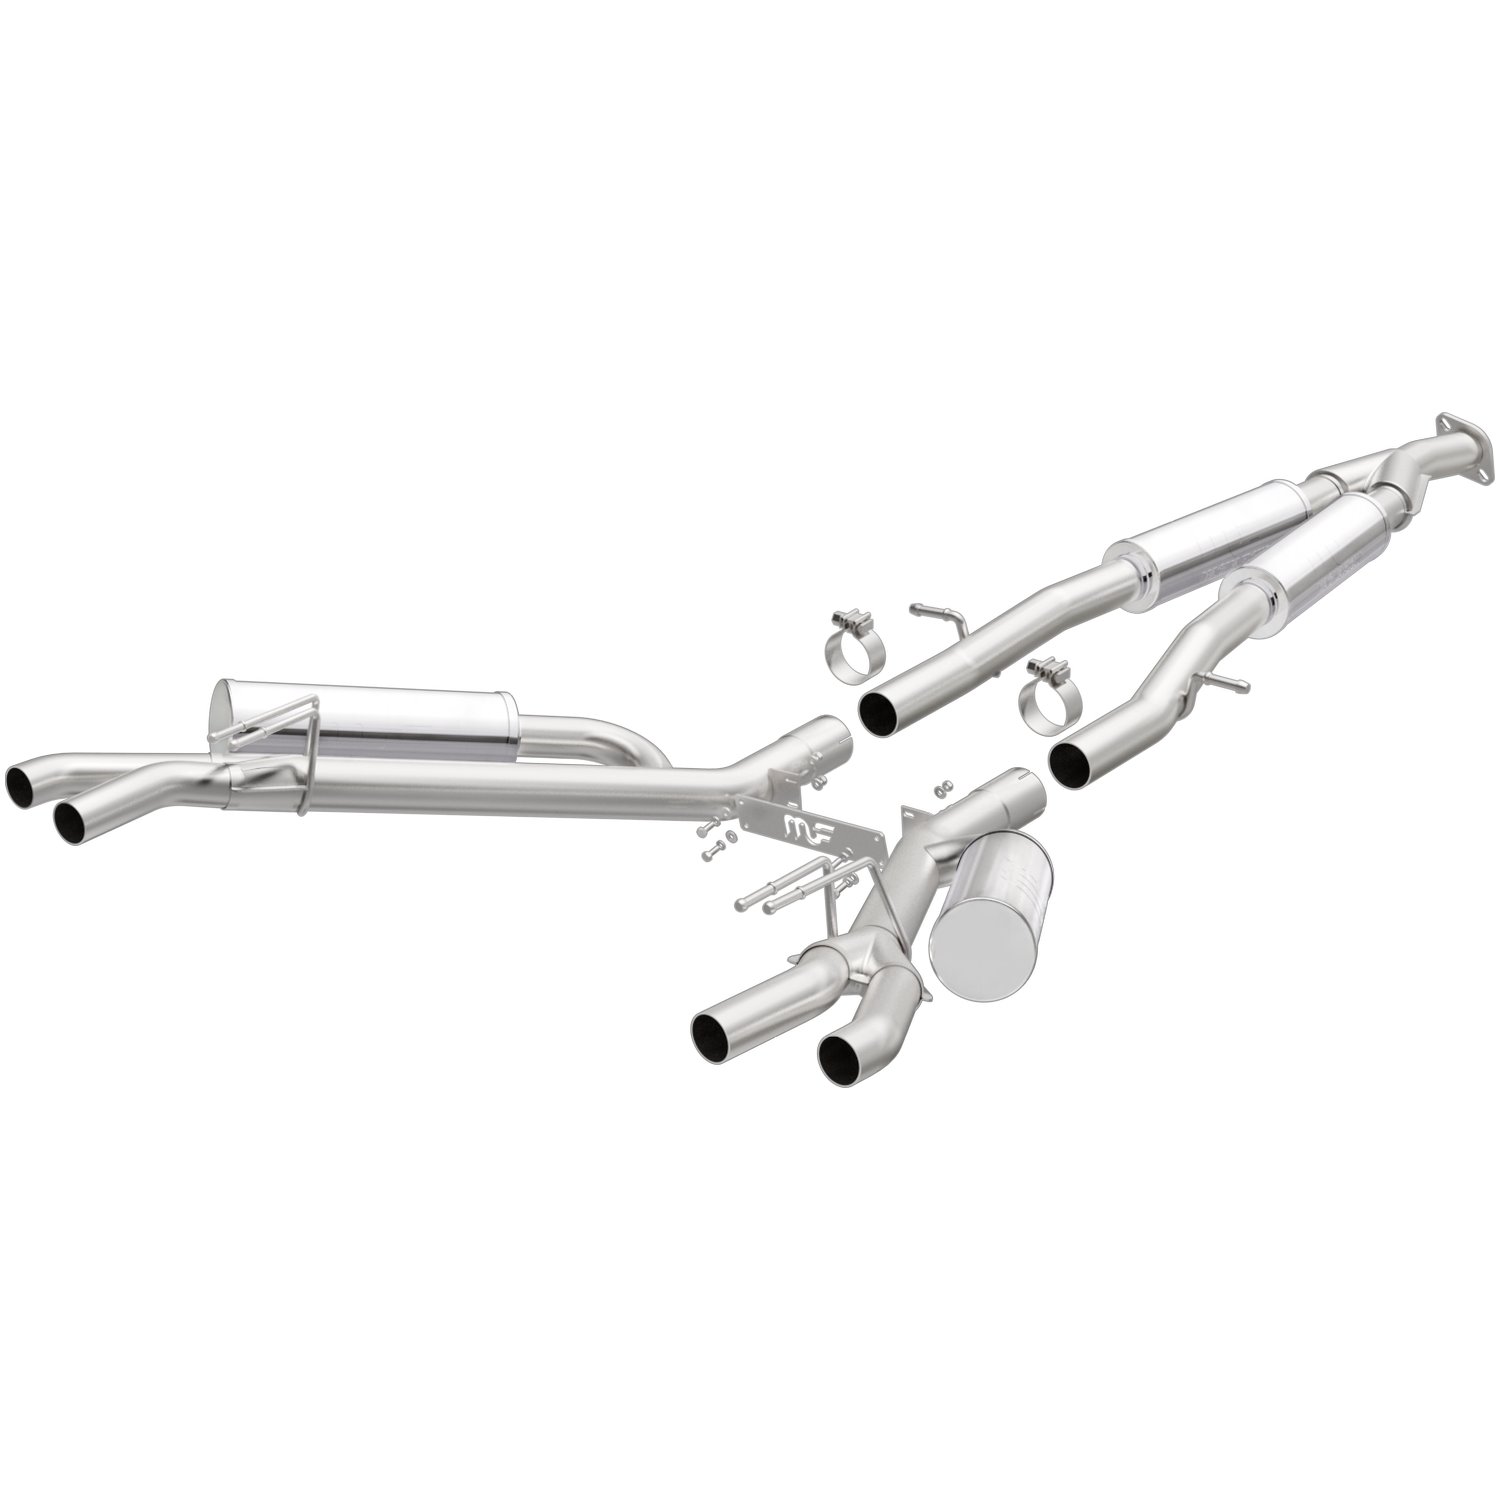 Competition Series Cat-Back Exhaust System 2018-2019 Fits KIA Stinger 2.0L